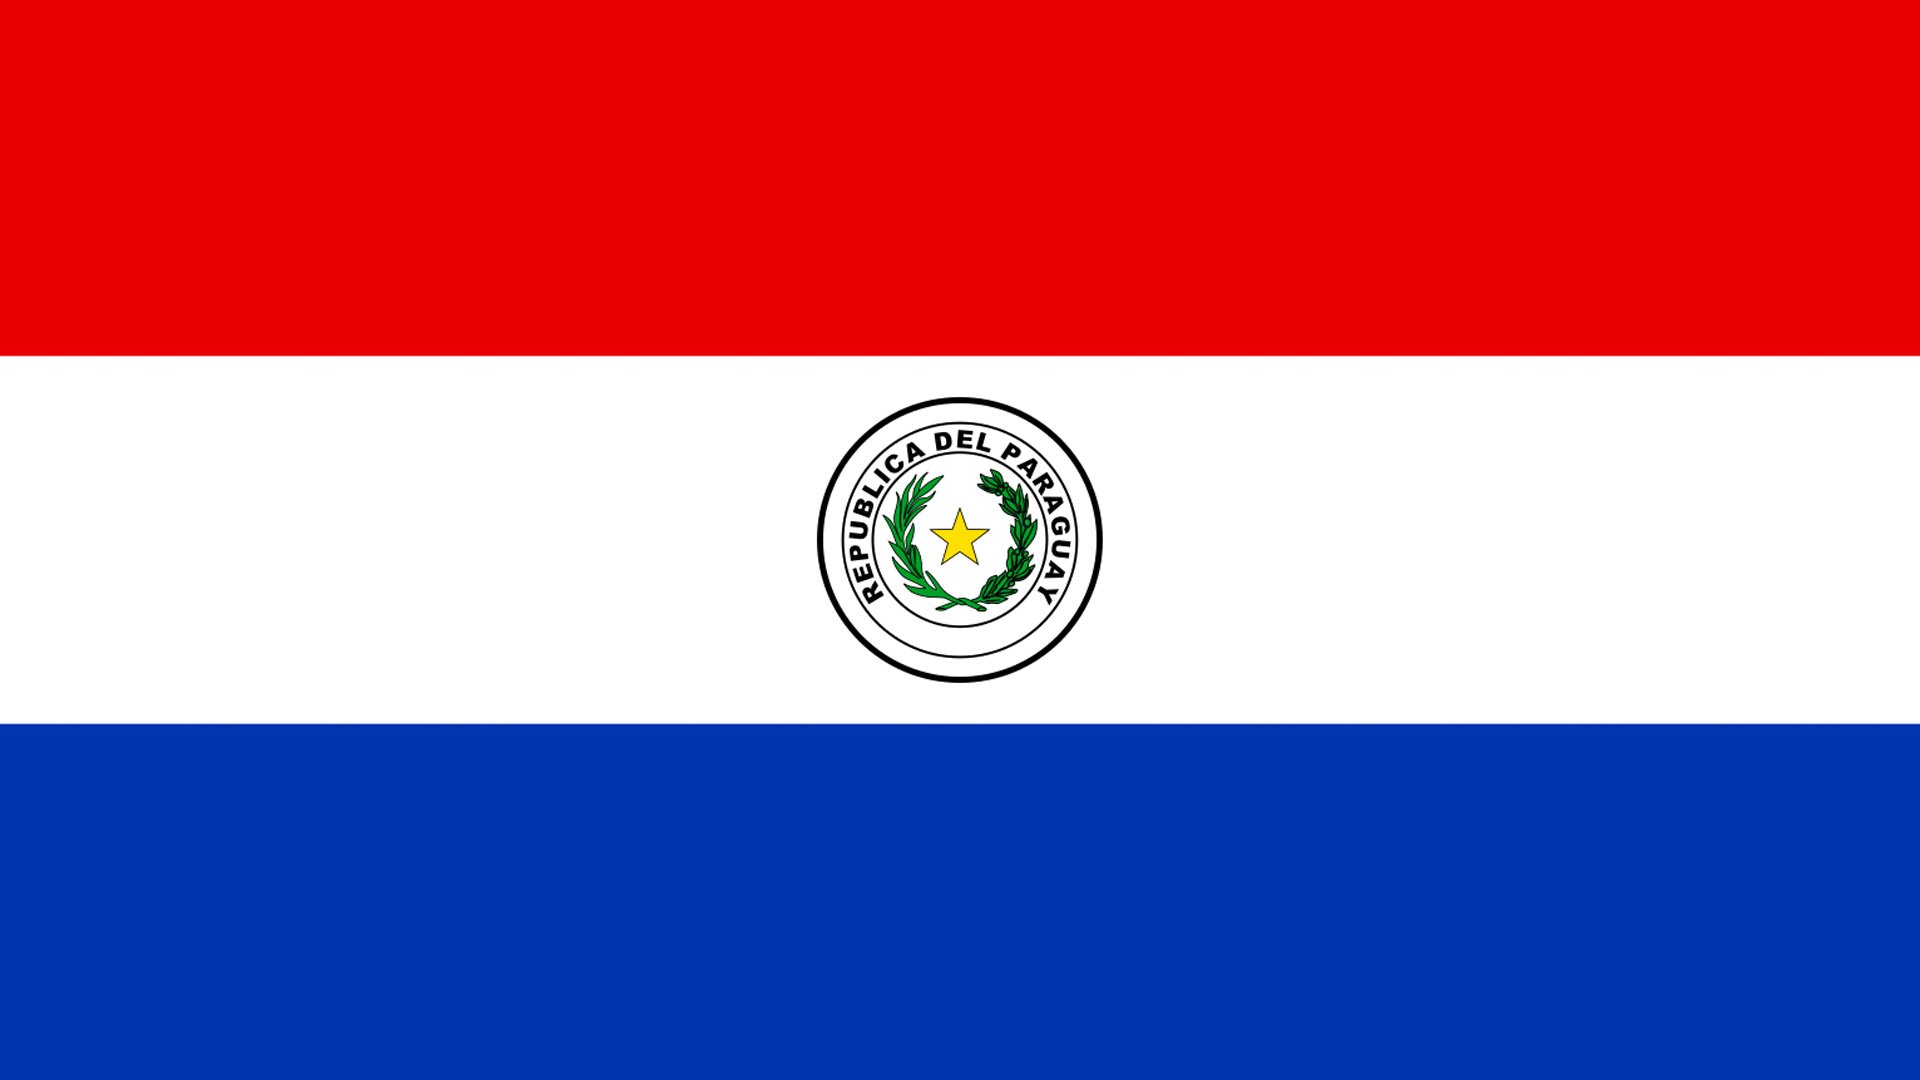 The flag of Paraguay